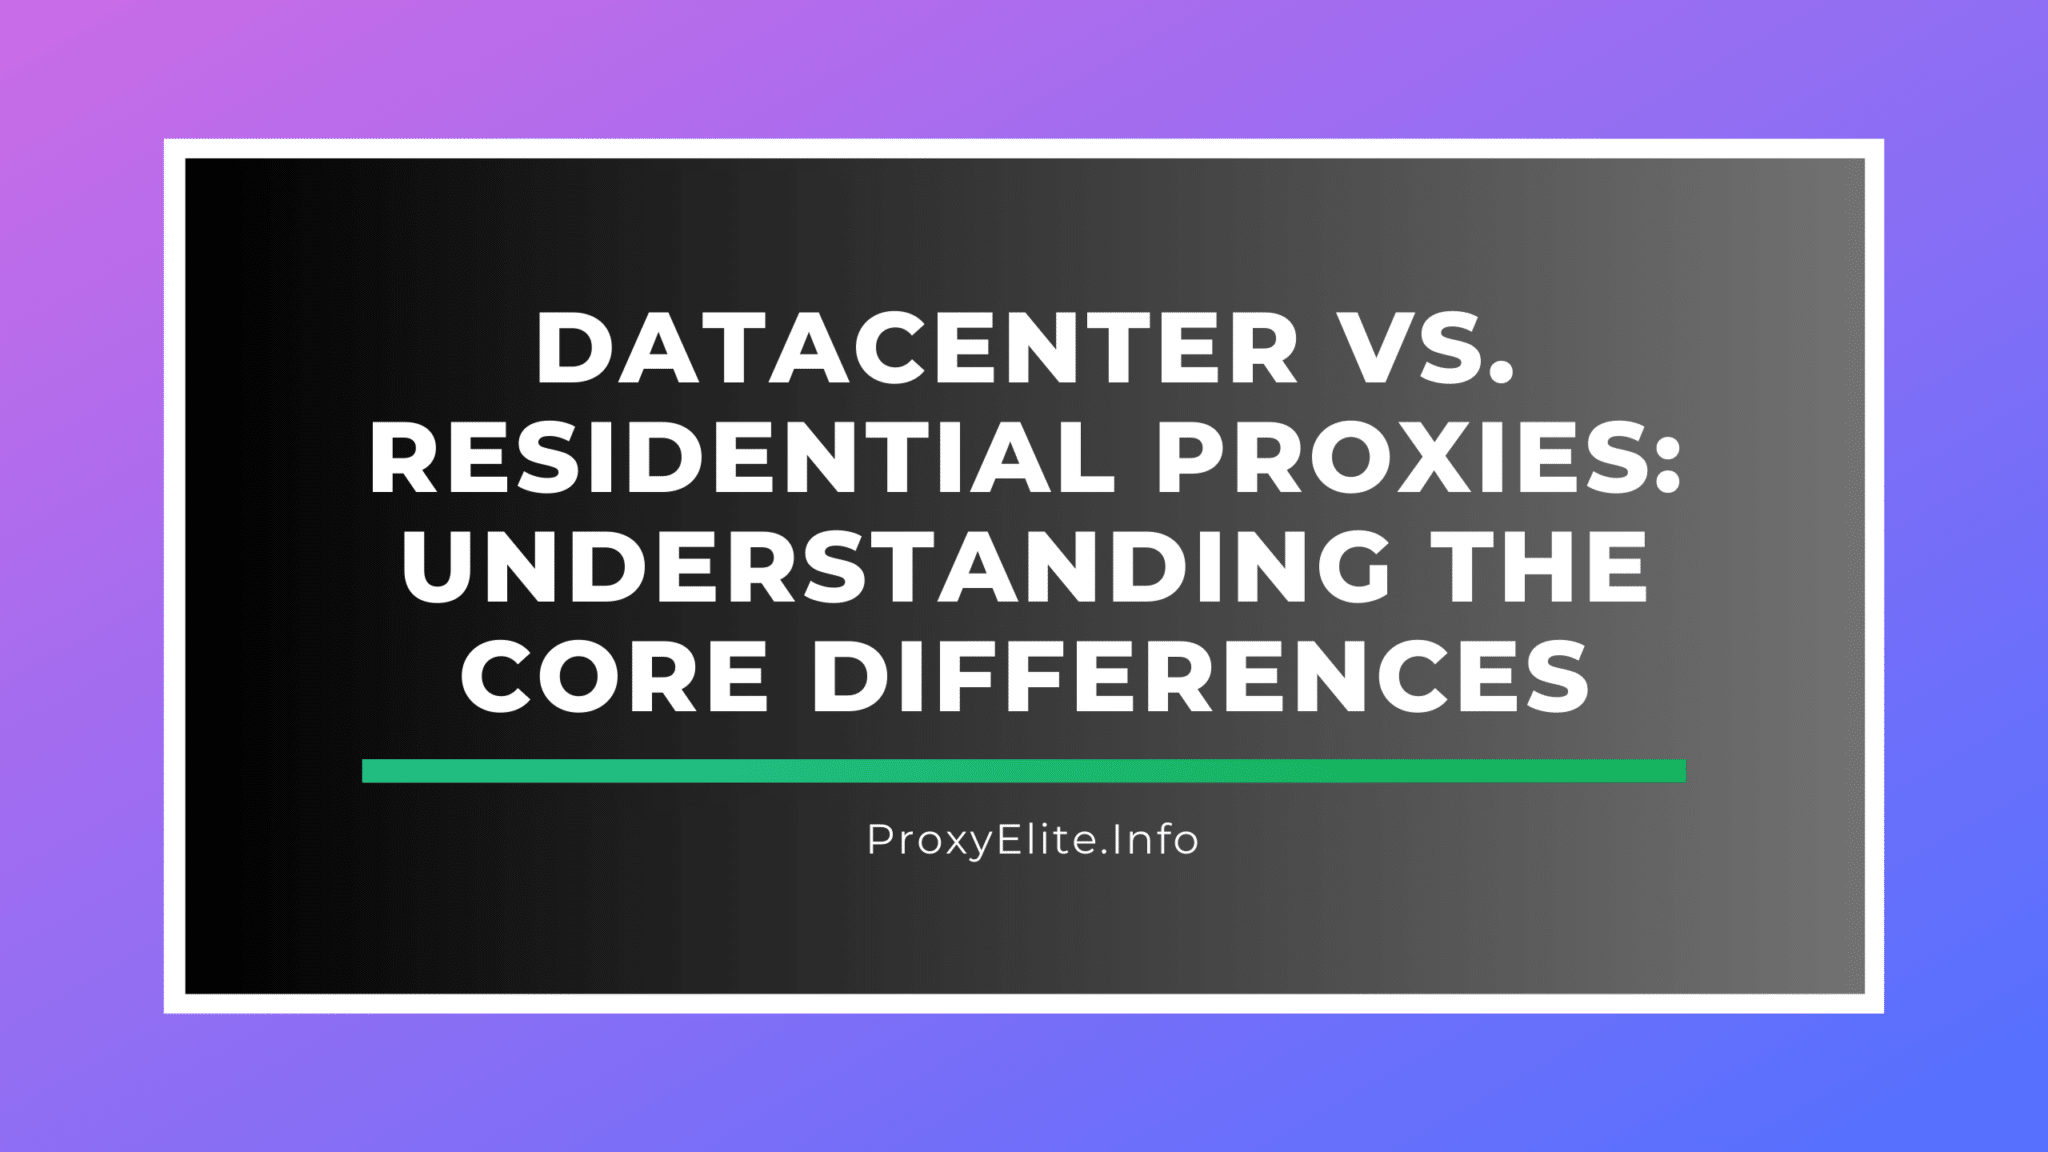 Datacenter vs. Residential Proxies: Understanding the Core Differences